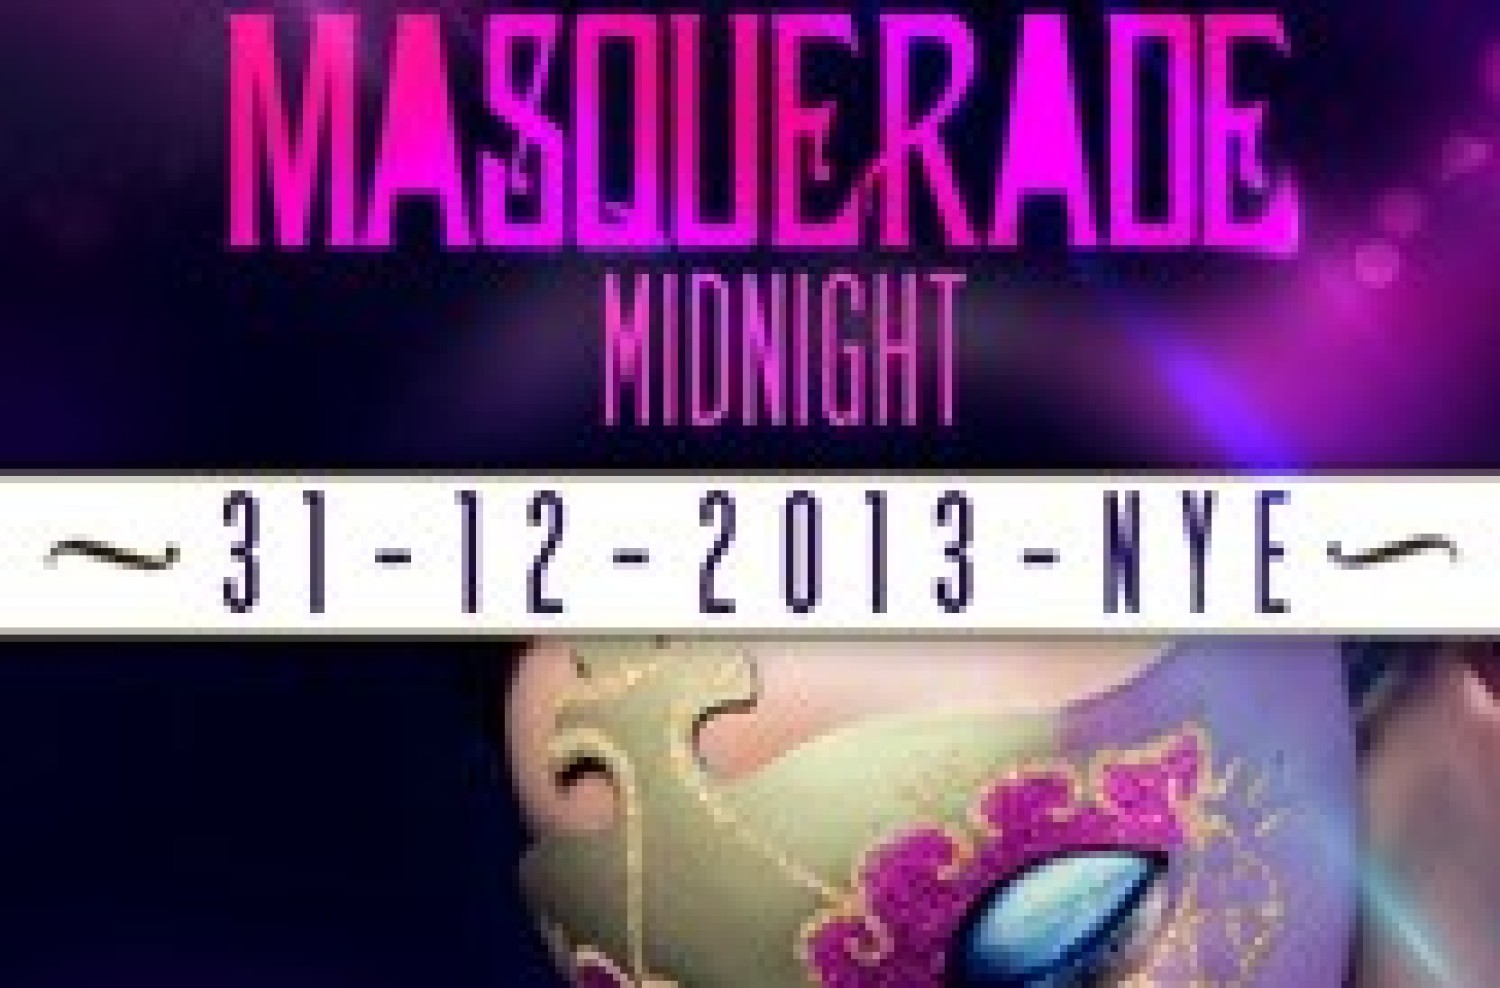 Party nieuws: Masquerade, an All-Inclusive Midnight, 31-12-2013